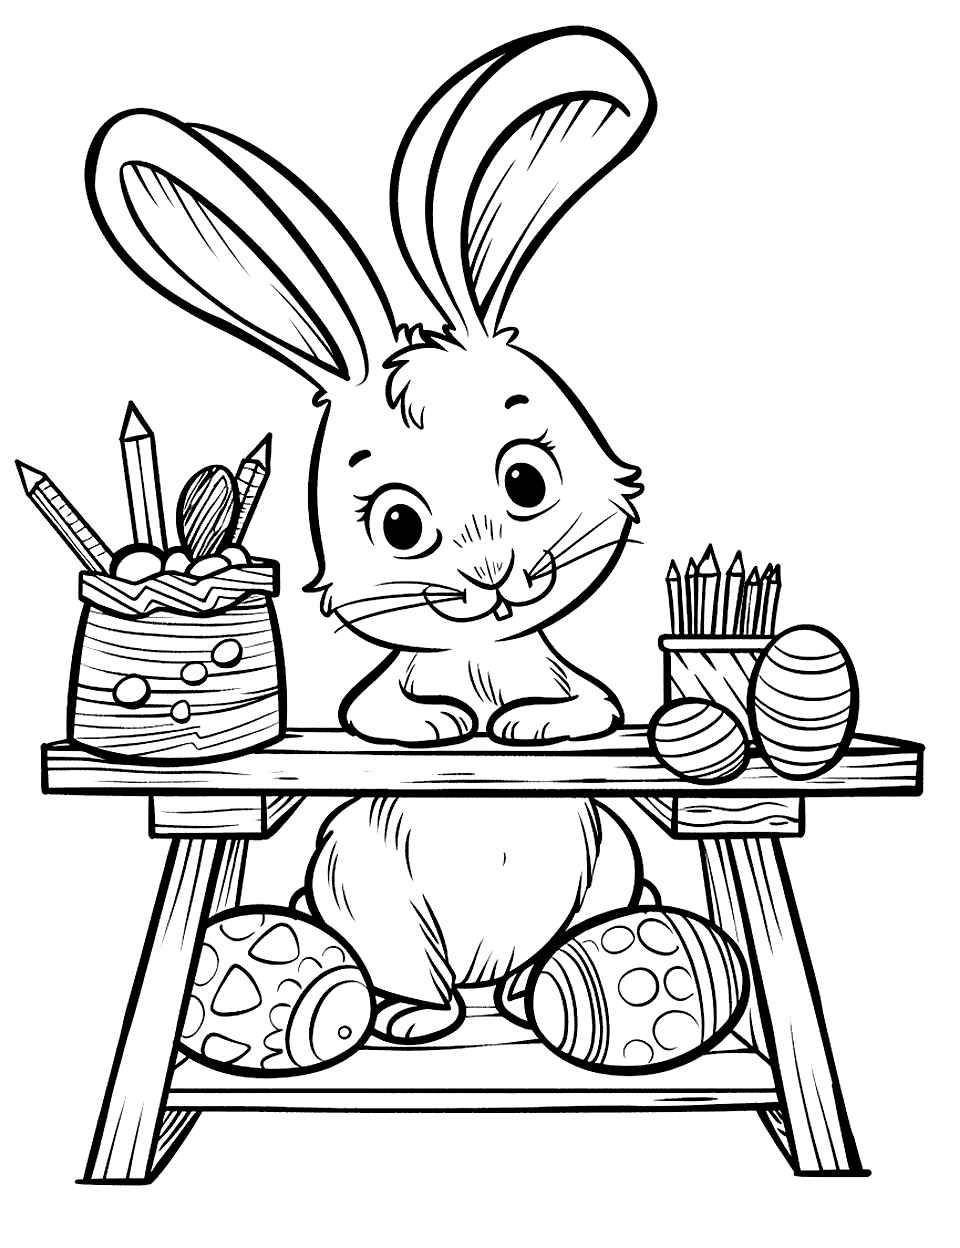 Easter Egg Crafting Table Bunny Coloring Page - A bunny sitting at a crafting table full of tools for decorating Easter eggs, looking creatively inspired.